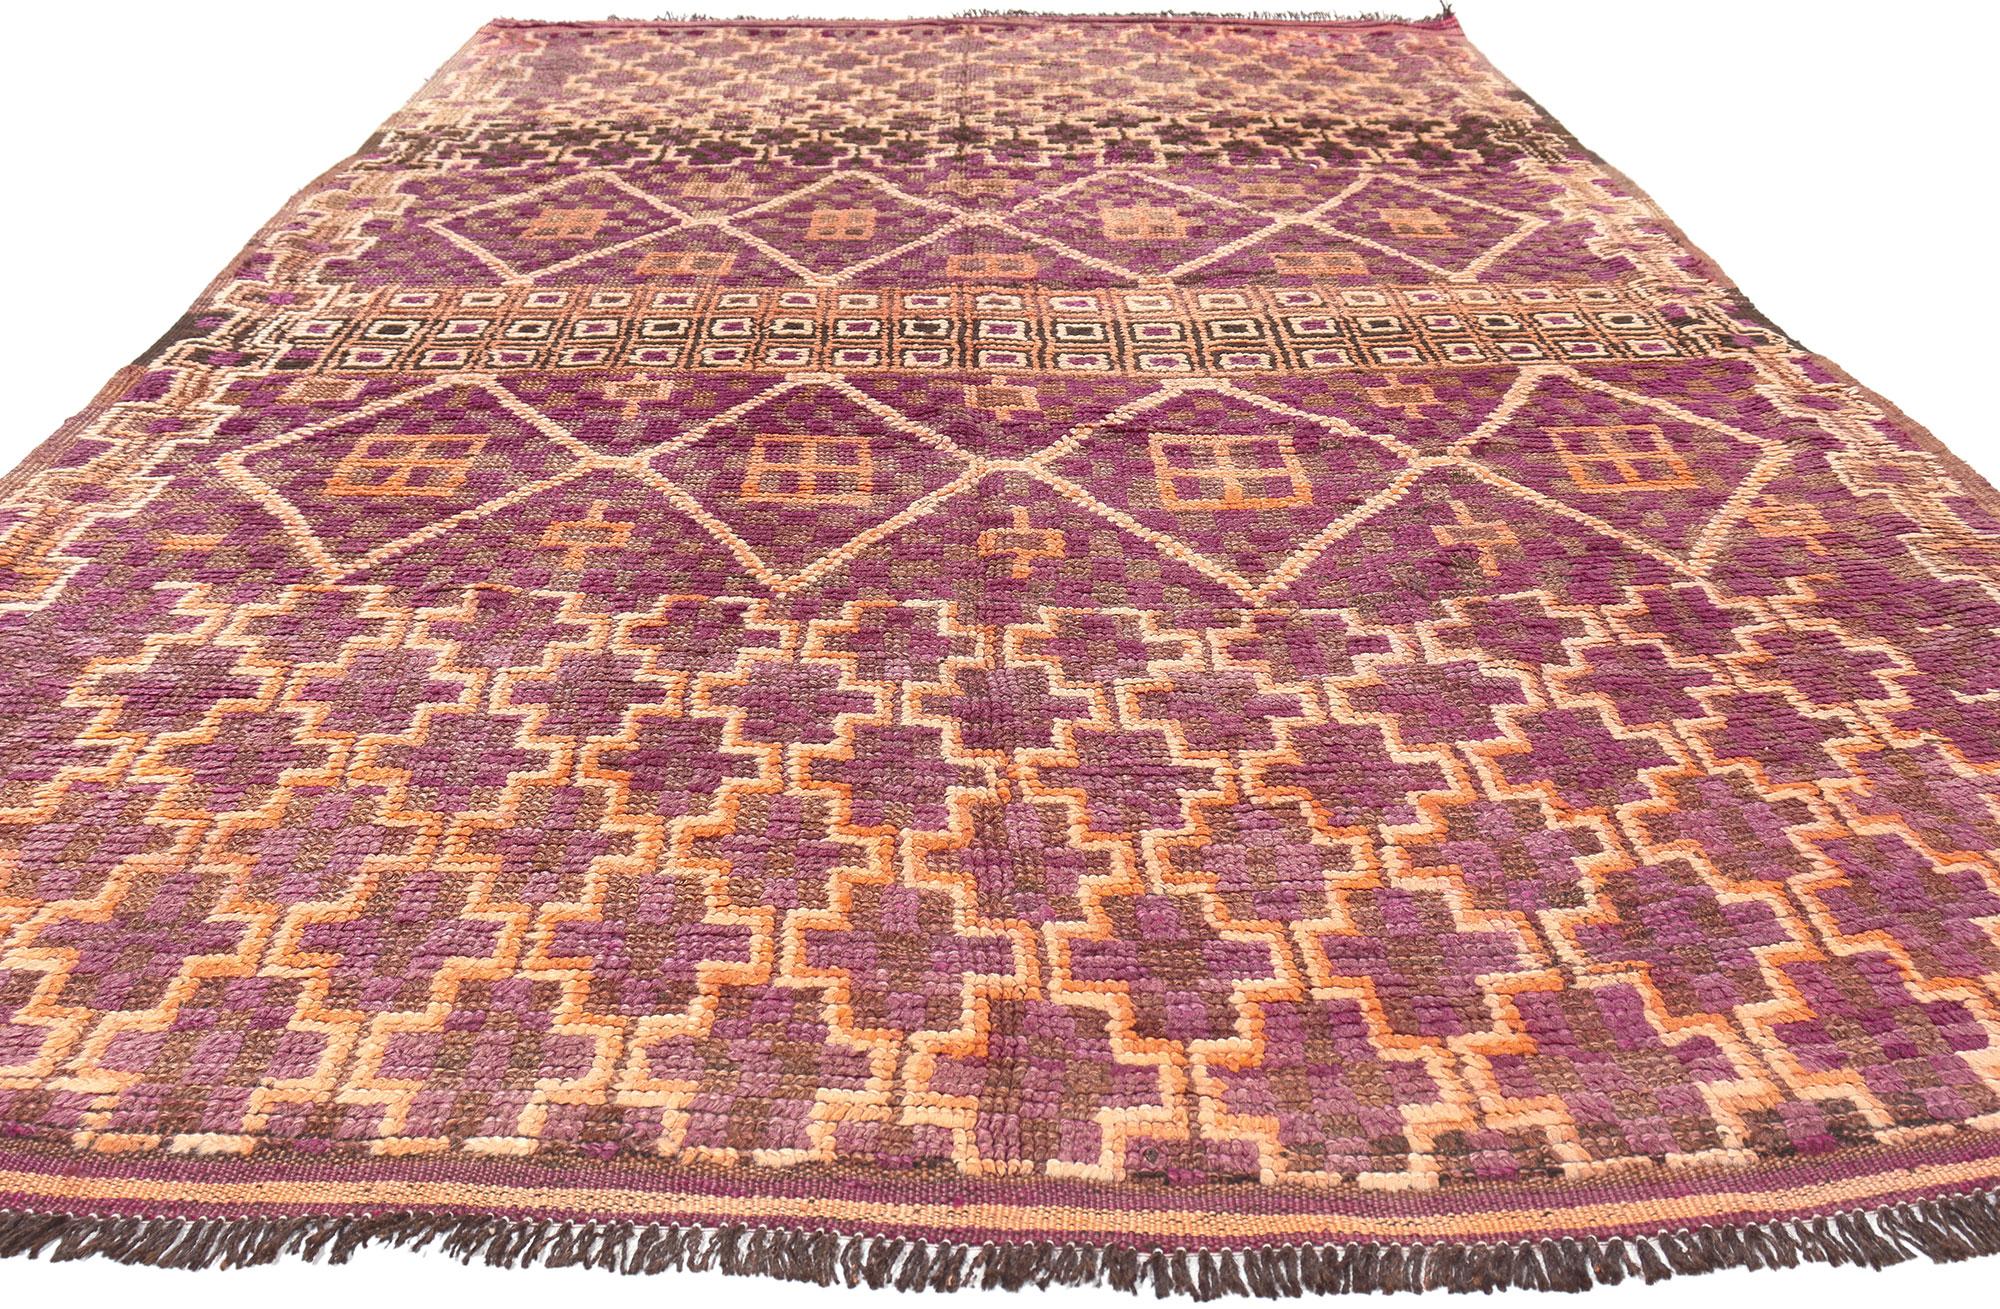 Hand-Knotted Vintage Beni MGuild Moroccan Rug, Bohemian Rhapsody Meets Midcentury Modern For Sale